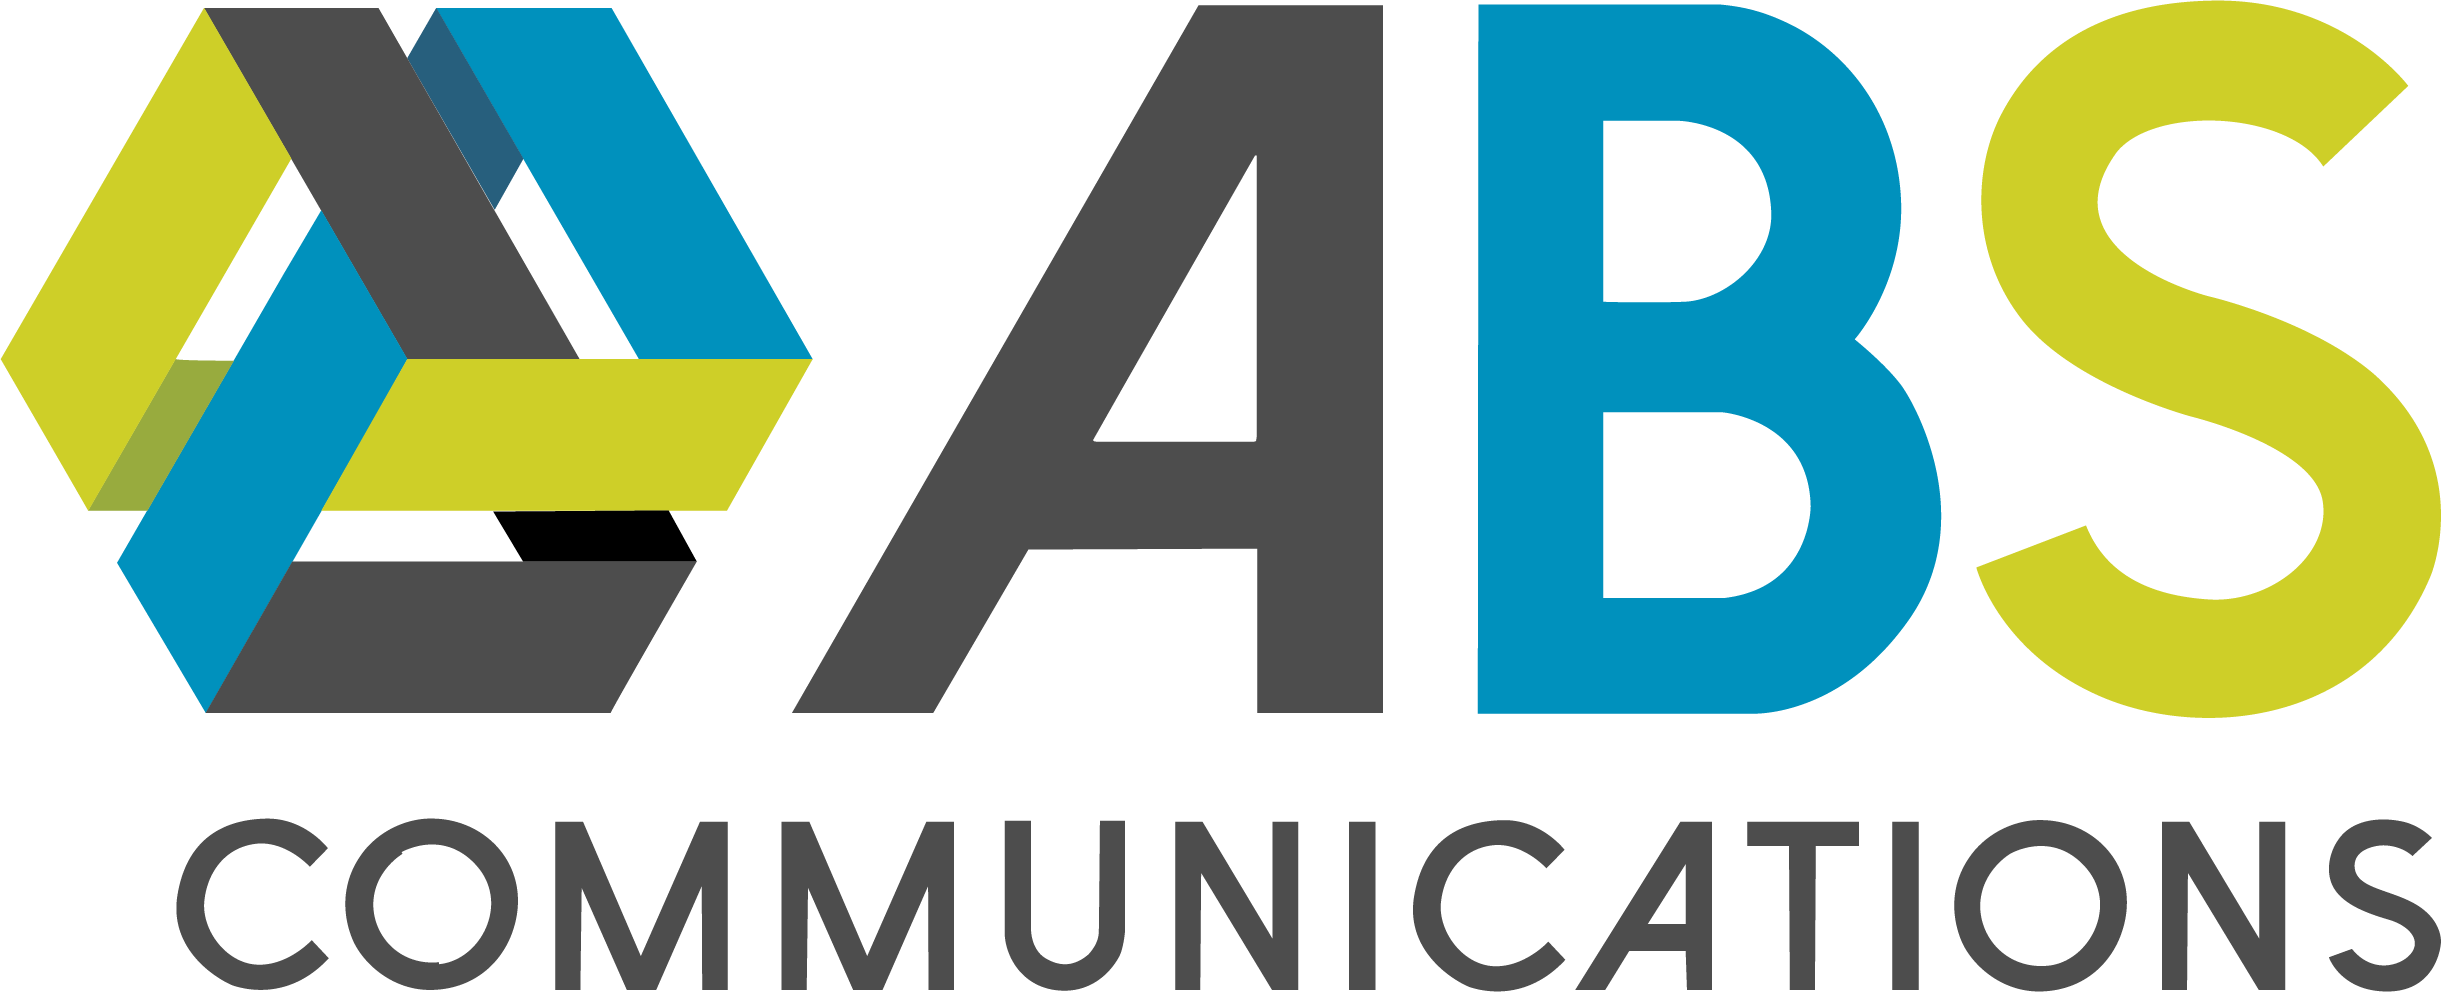 ABS Communications